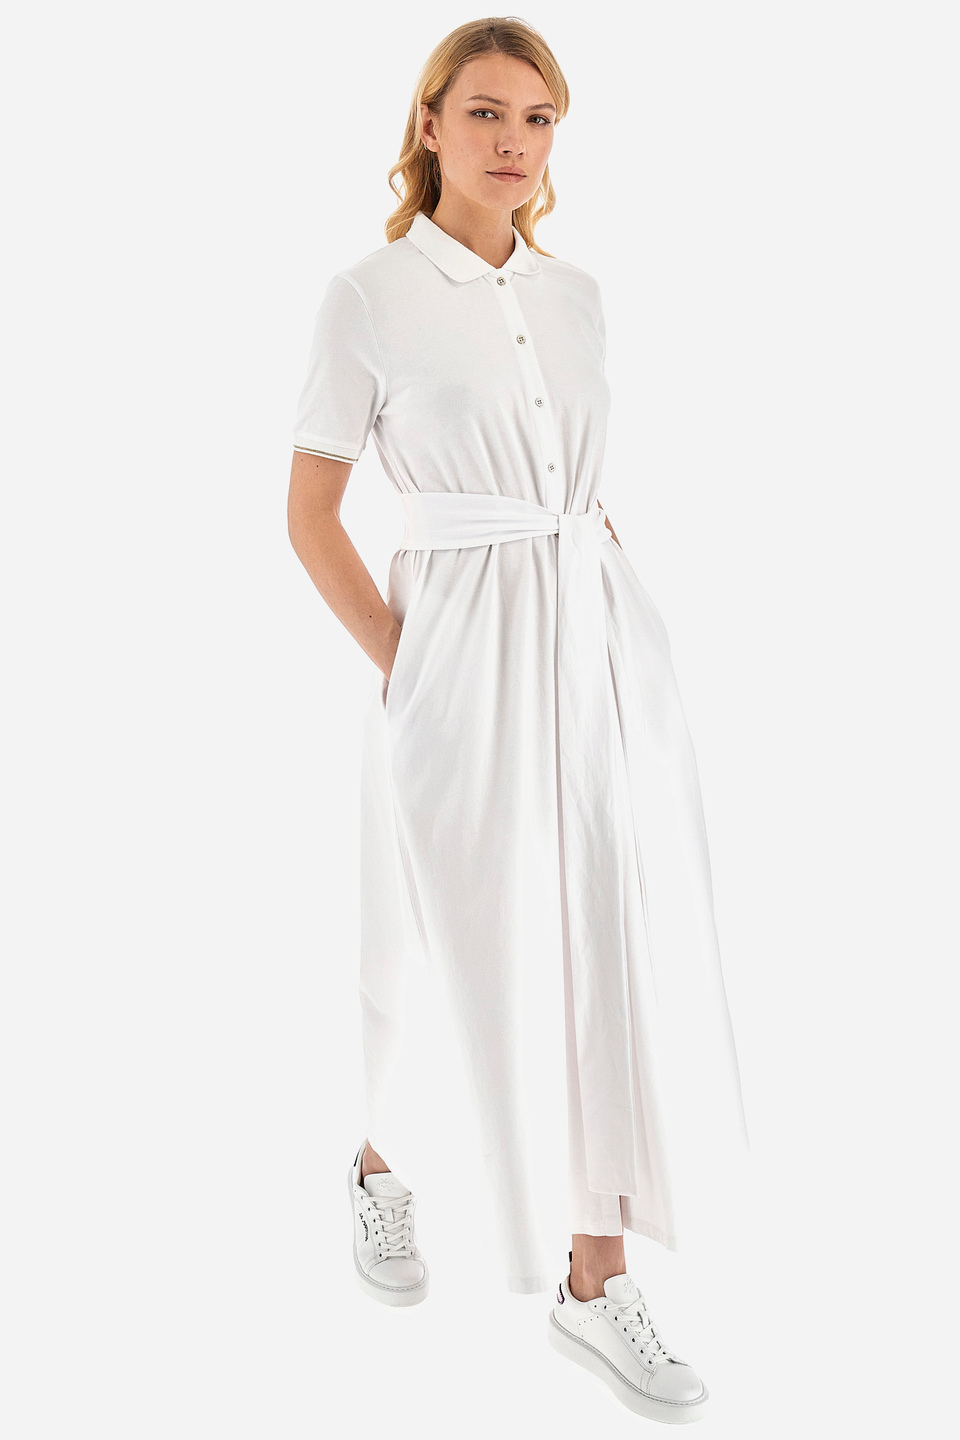 Women's long dress in cotton blend with short sleeves- | La Martina - Official Online Shop